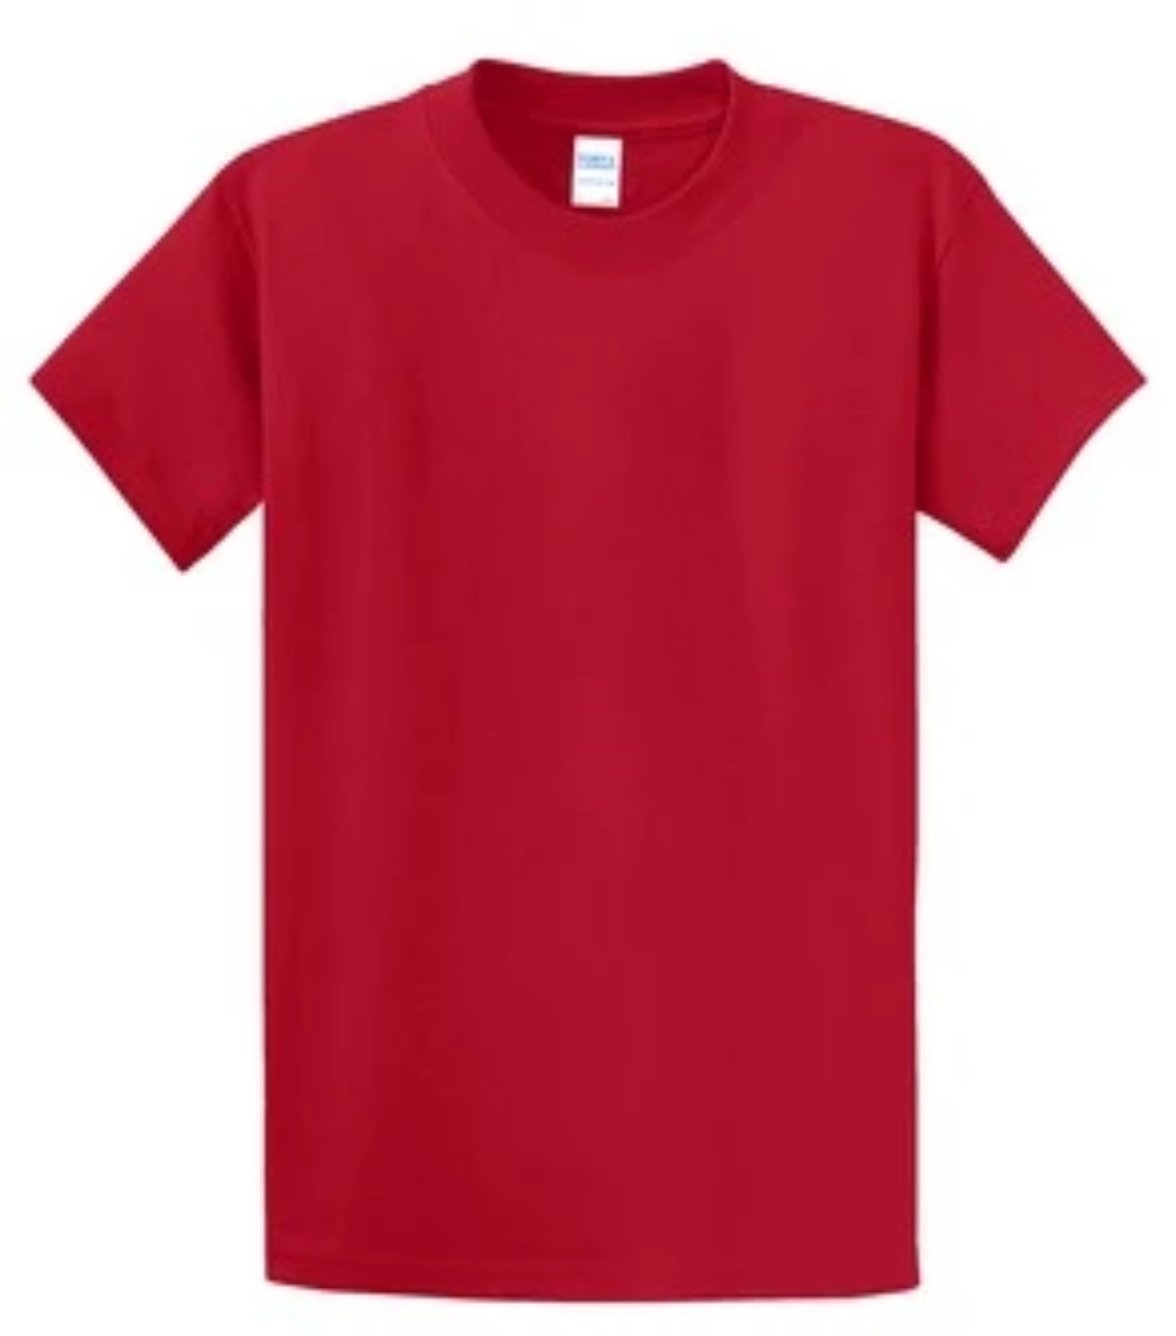 Port & Company 100% Cotton Essential T-Shirt Red PC61